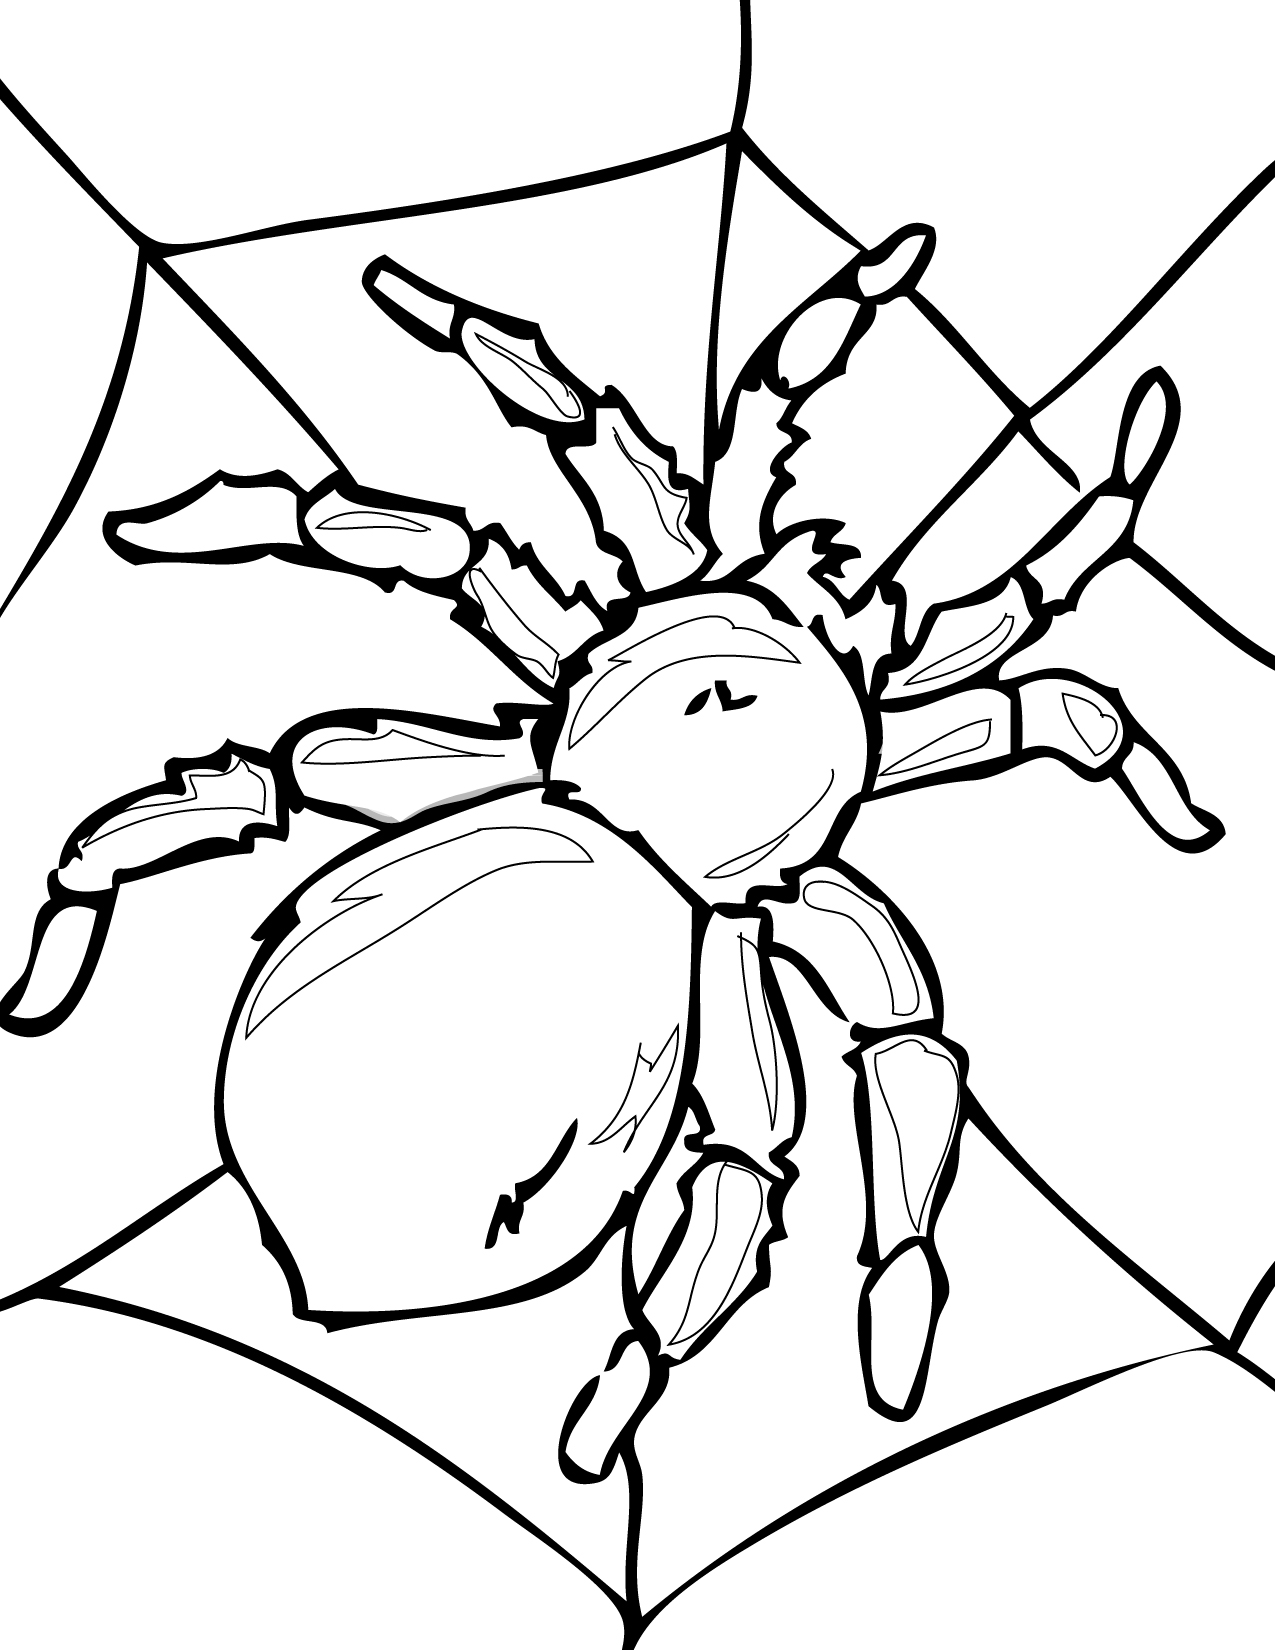 Spider Coloring Picture 9